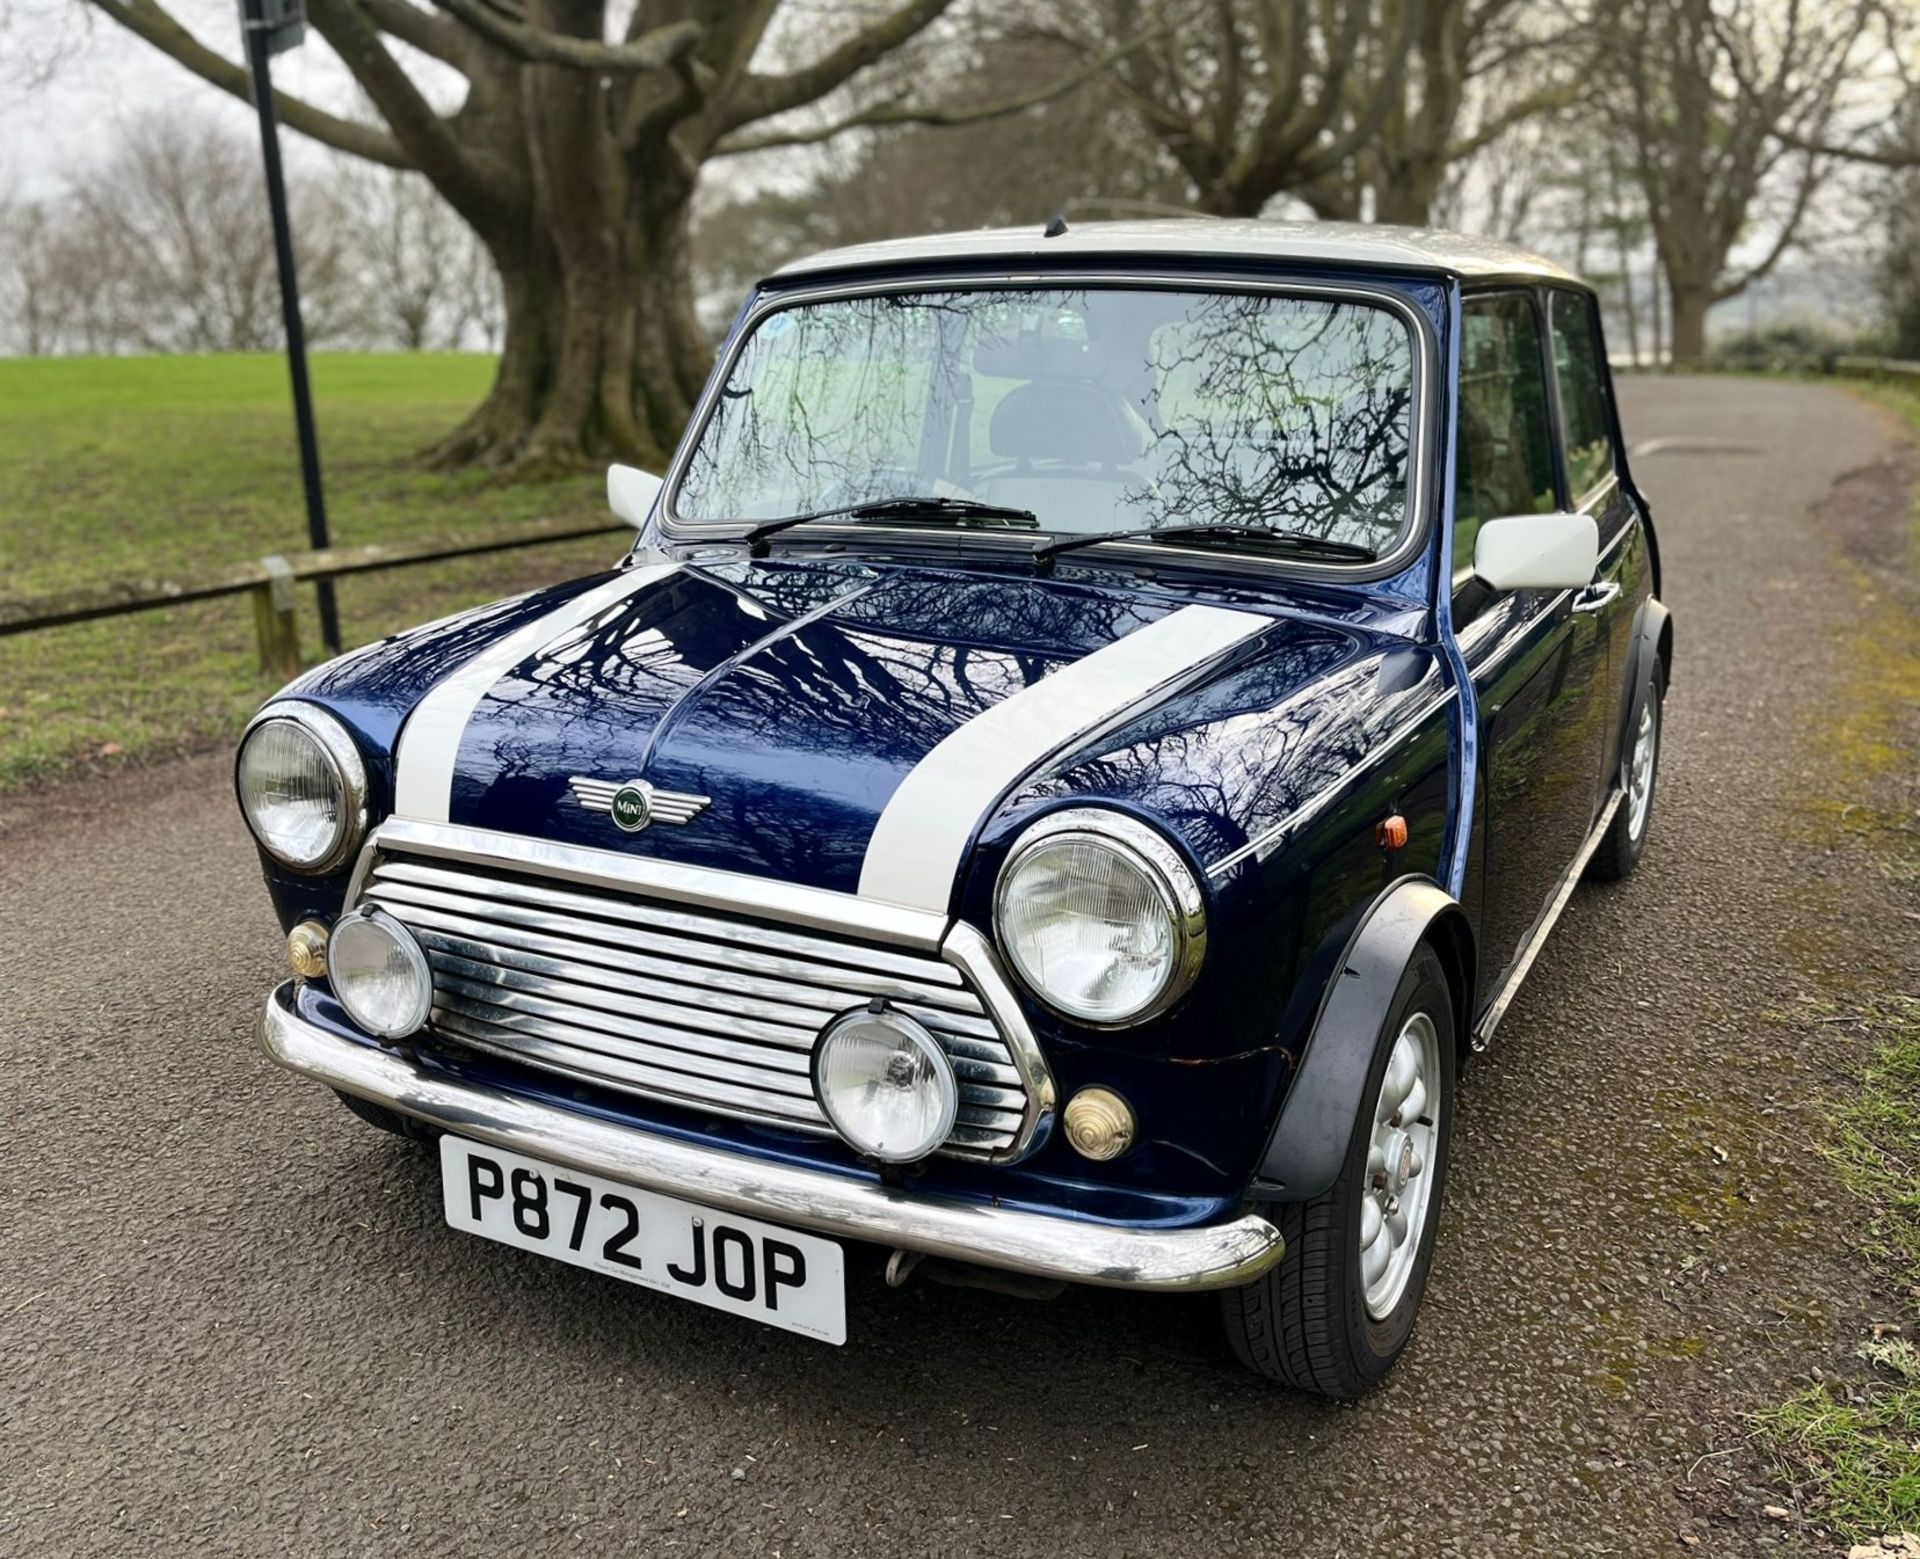 1997 MINI COOPER MPI Registration Number: P872 JOP Chassis Number: SAXXNNAZEBD141820 Recorded